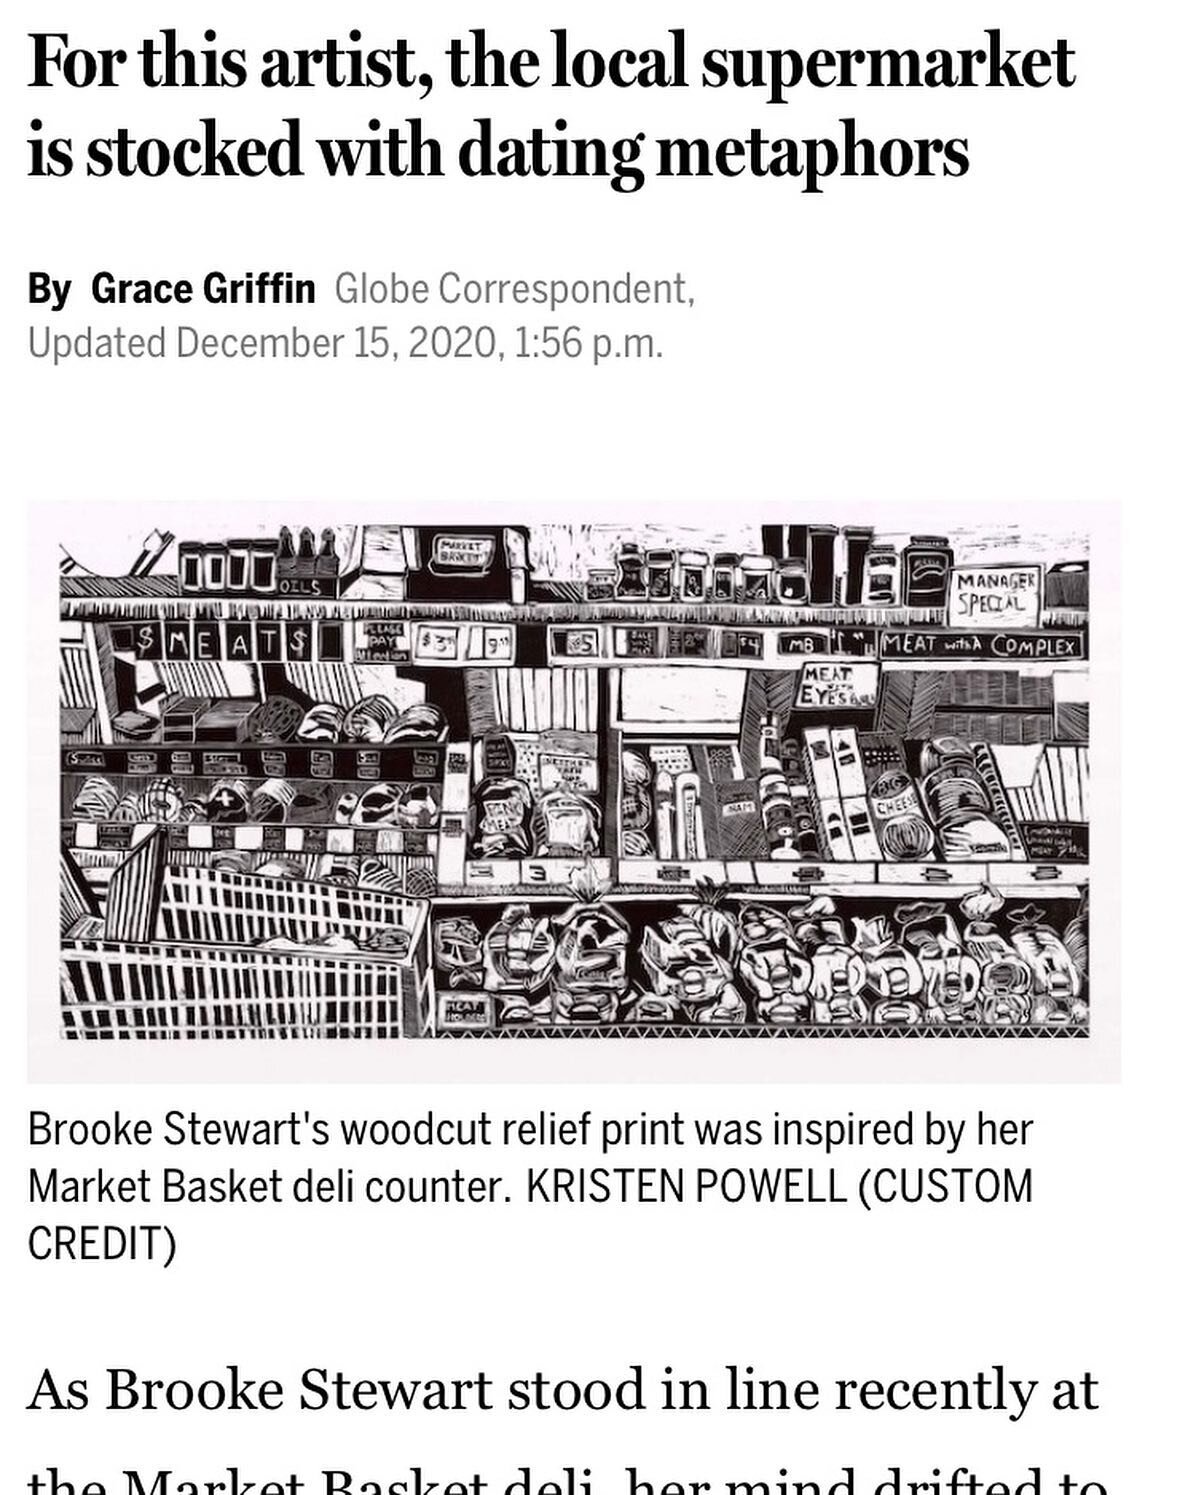 Today in the @bostonglobe - Grace Griffin discusses NO POTATOES w/ @brooke_stewart_art. Read full article through link in bio. 
NO POTATOES is on view through January 17.